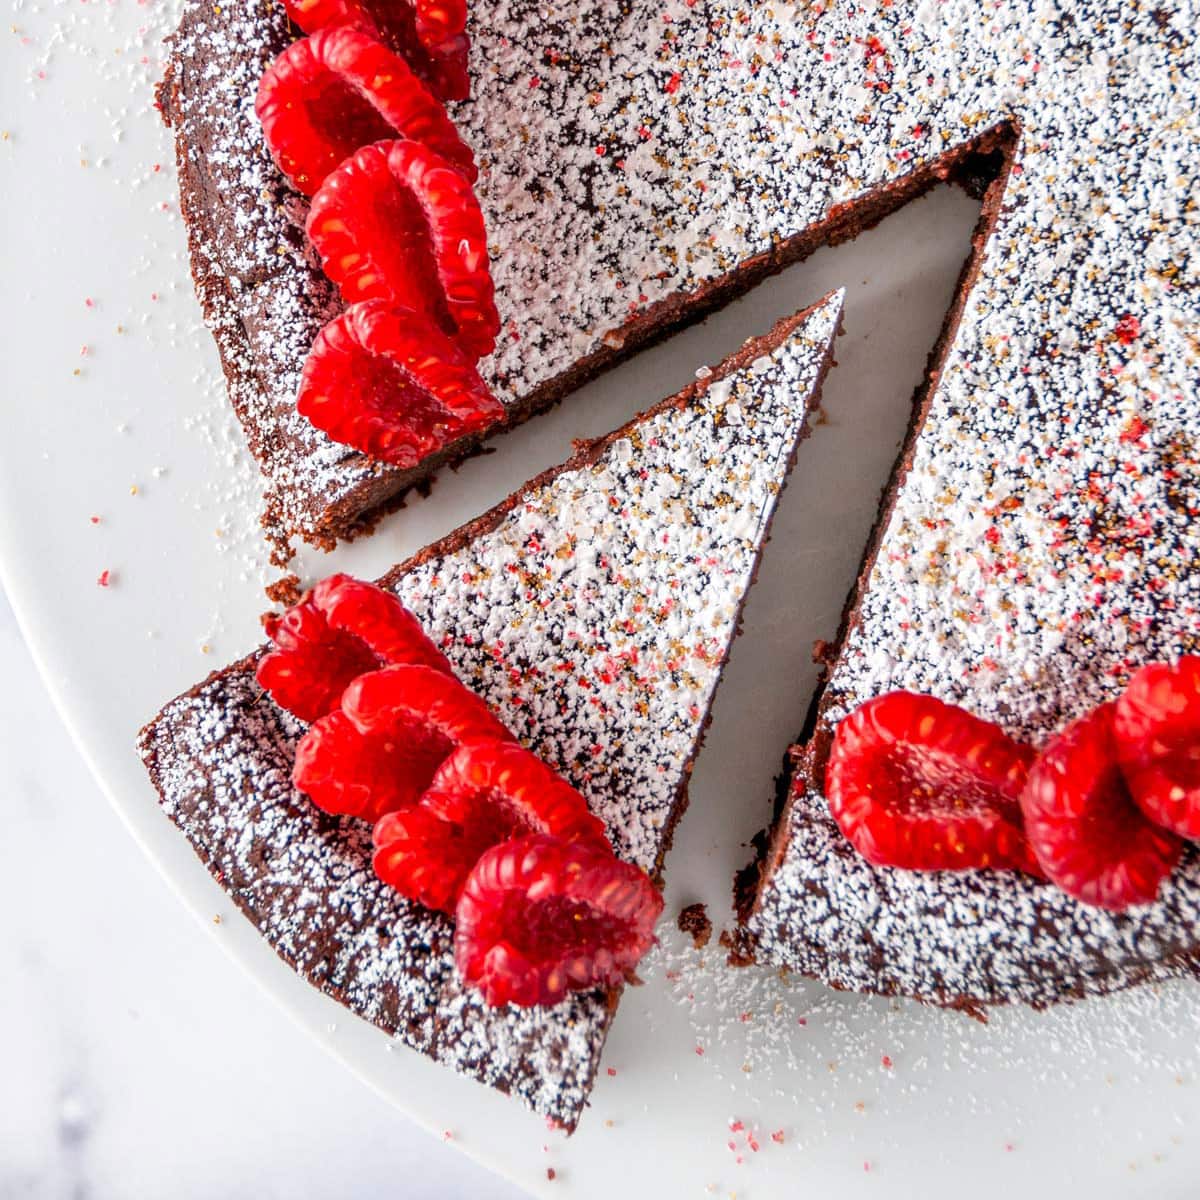 Chocolate Raspberry Flourless Cake sprinkled with powdered sugar on white cake stand with one slice cut overhead view